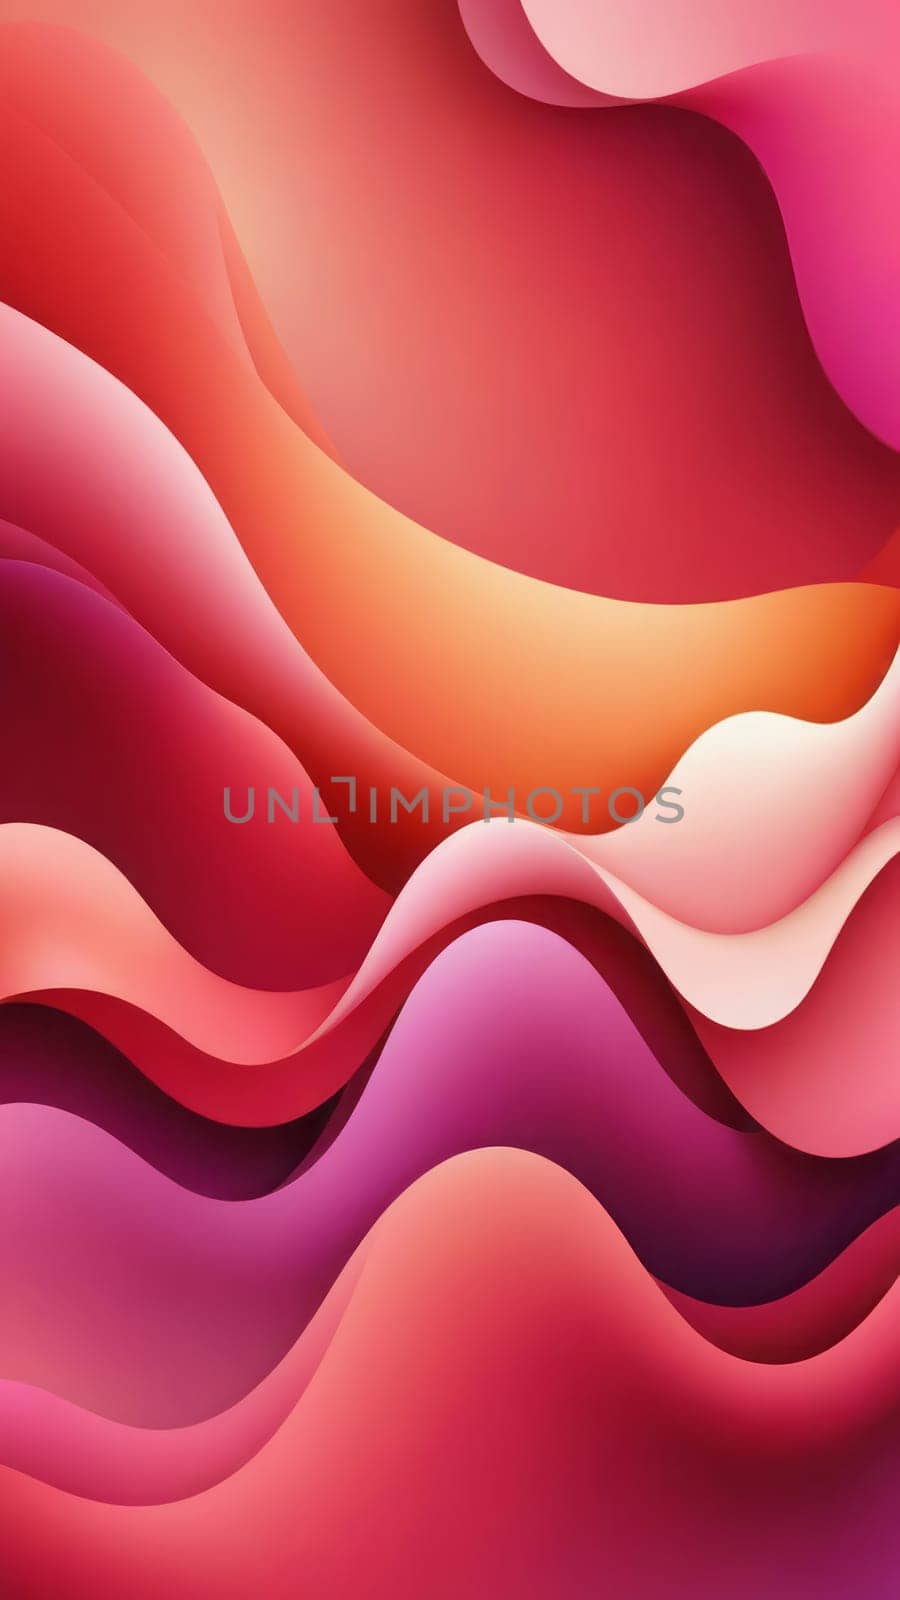 Colorful art from Organic shapes and red by nkotlyar